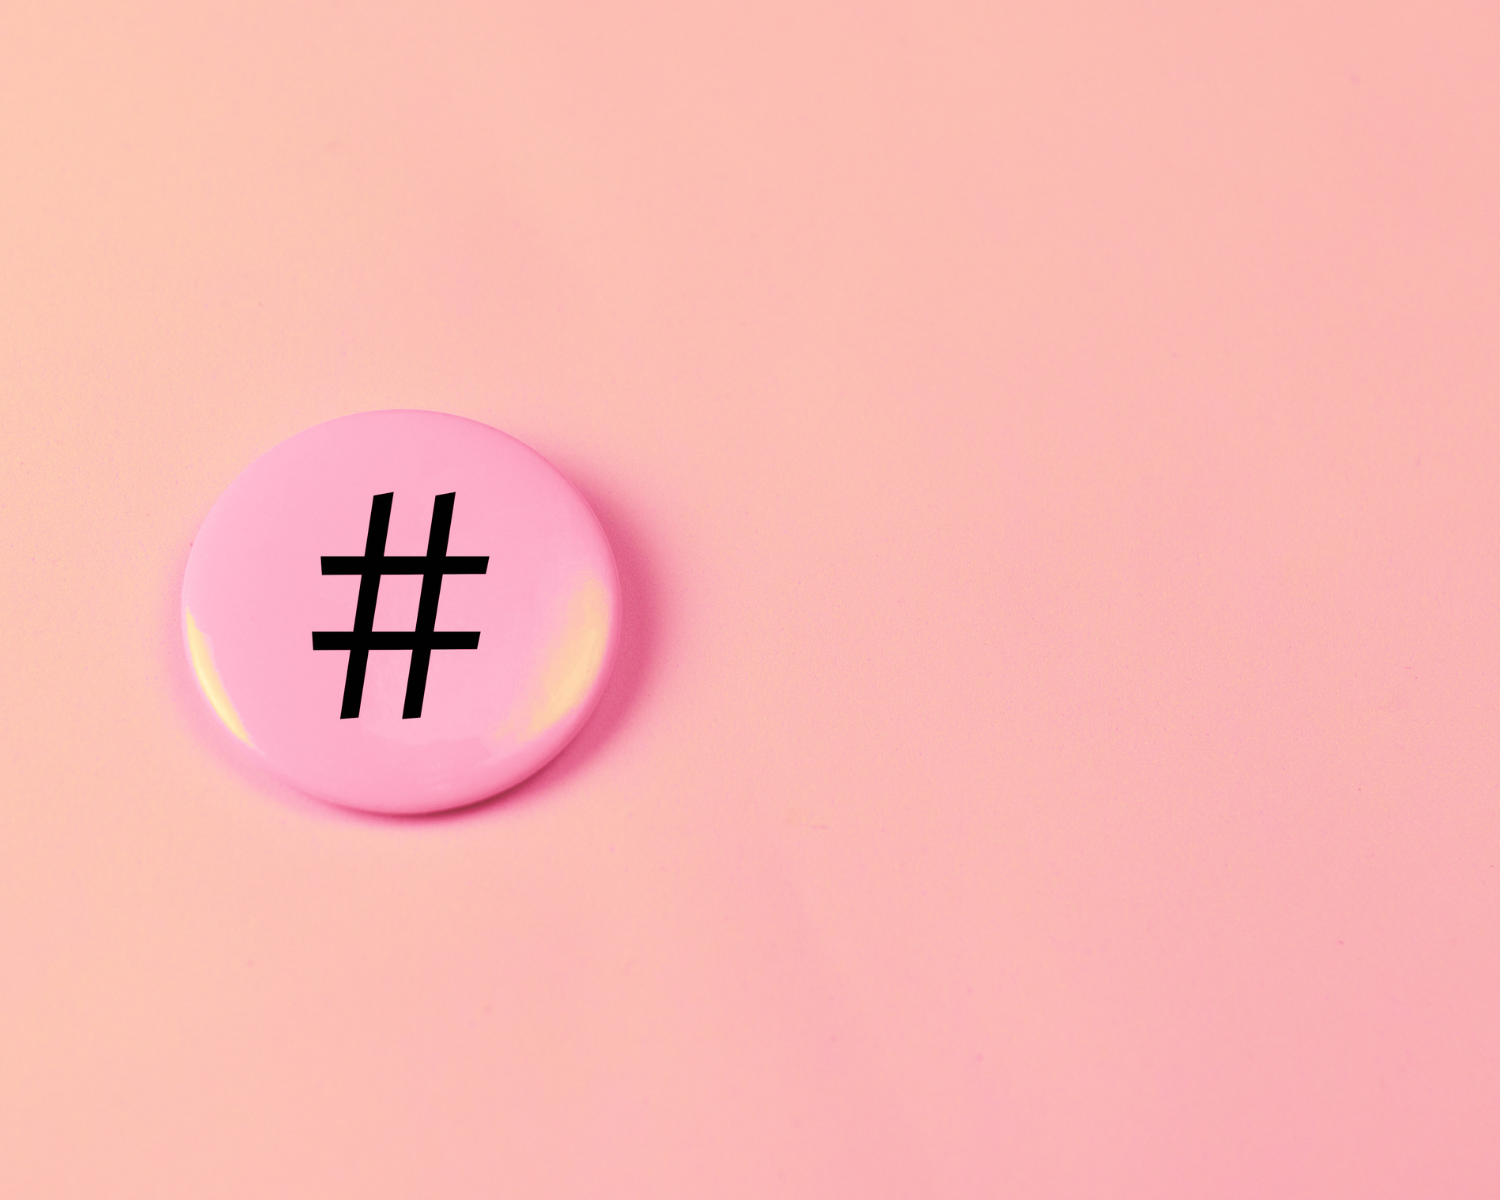 How to Use Hashtags to Grow Your Business